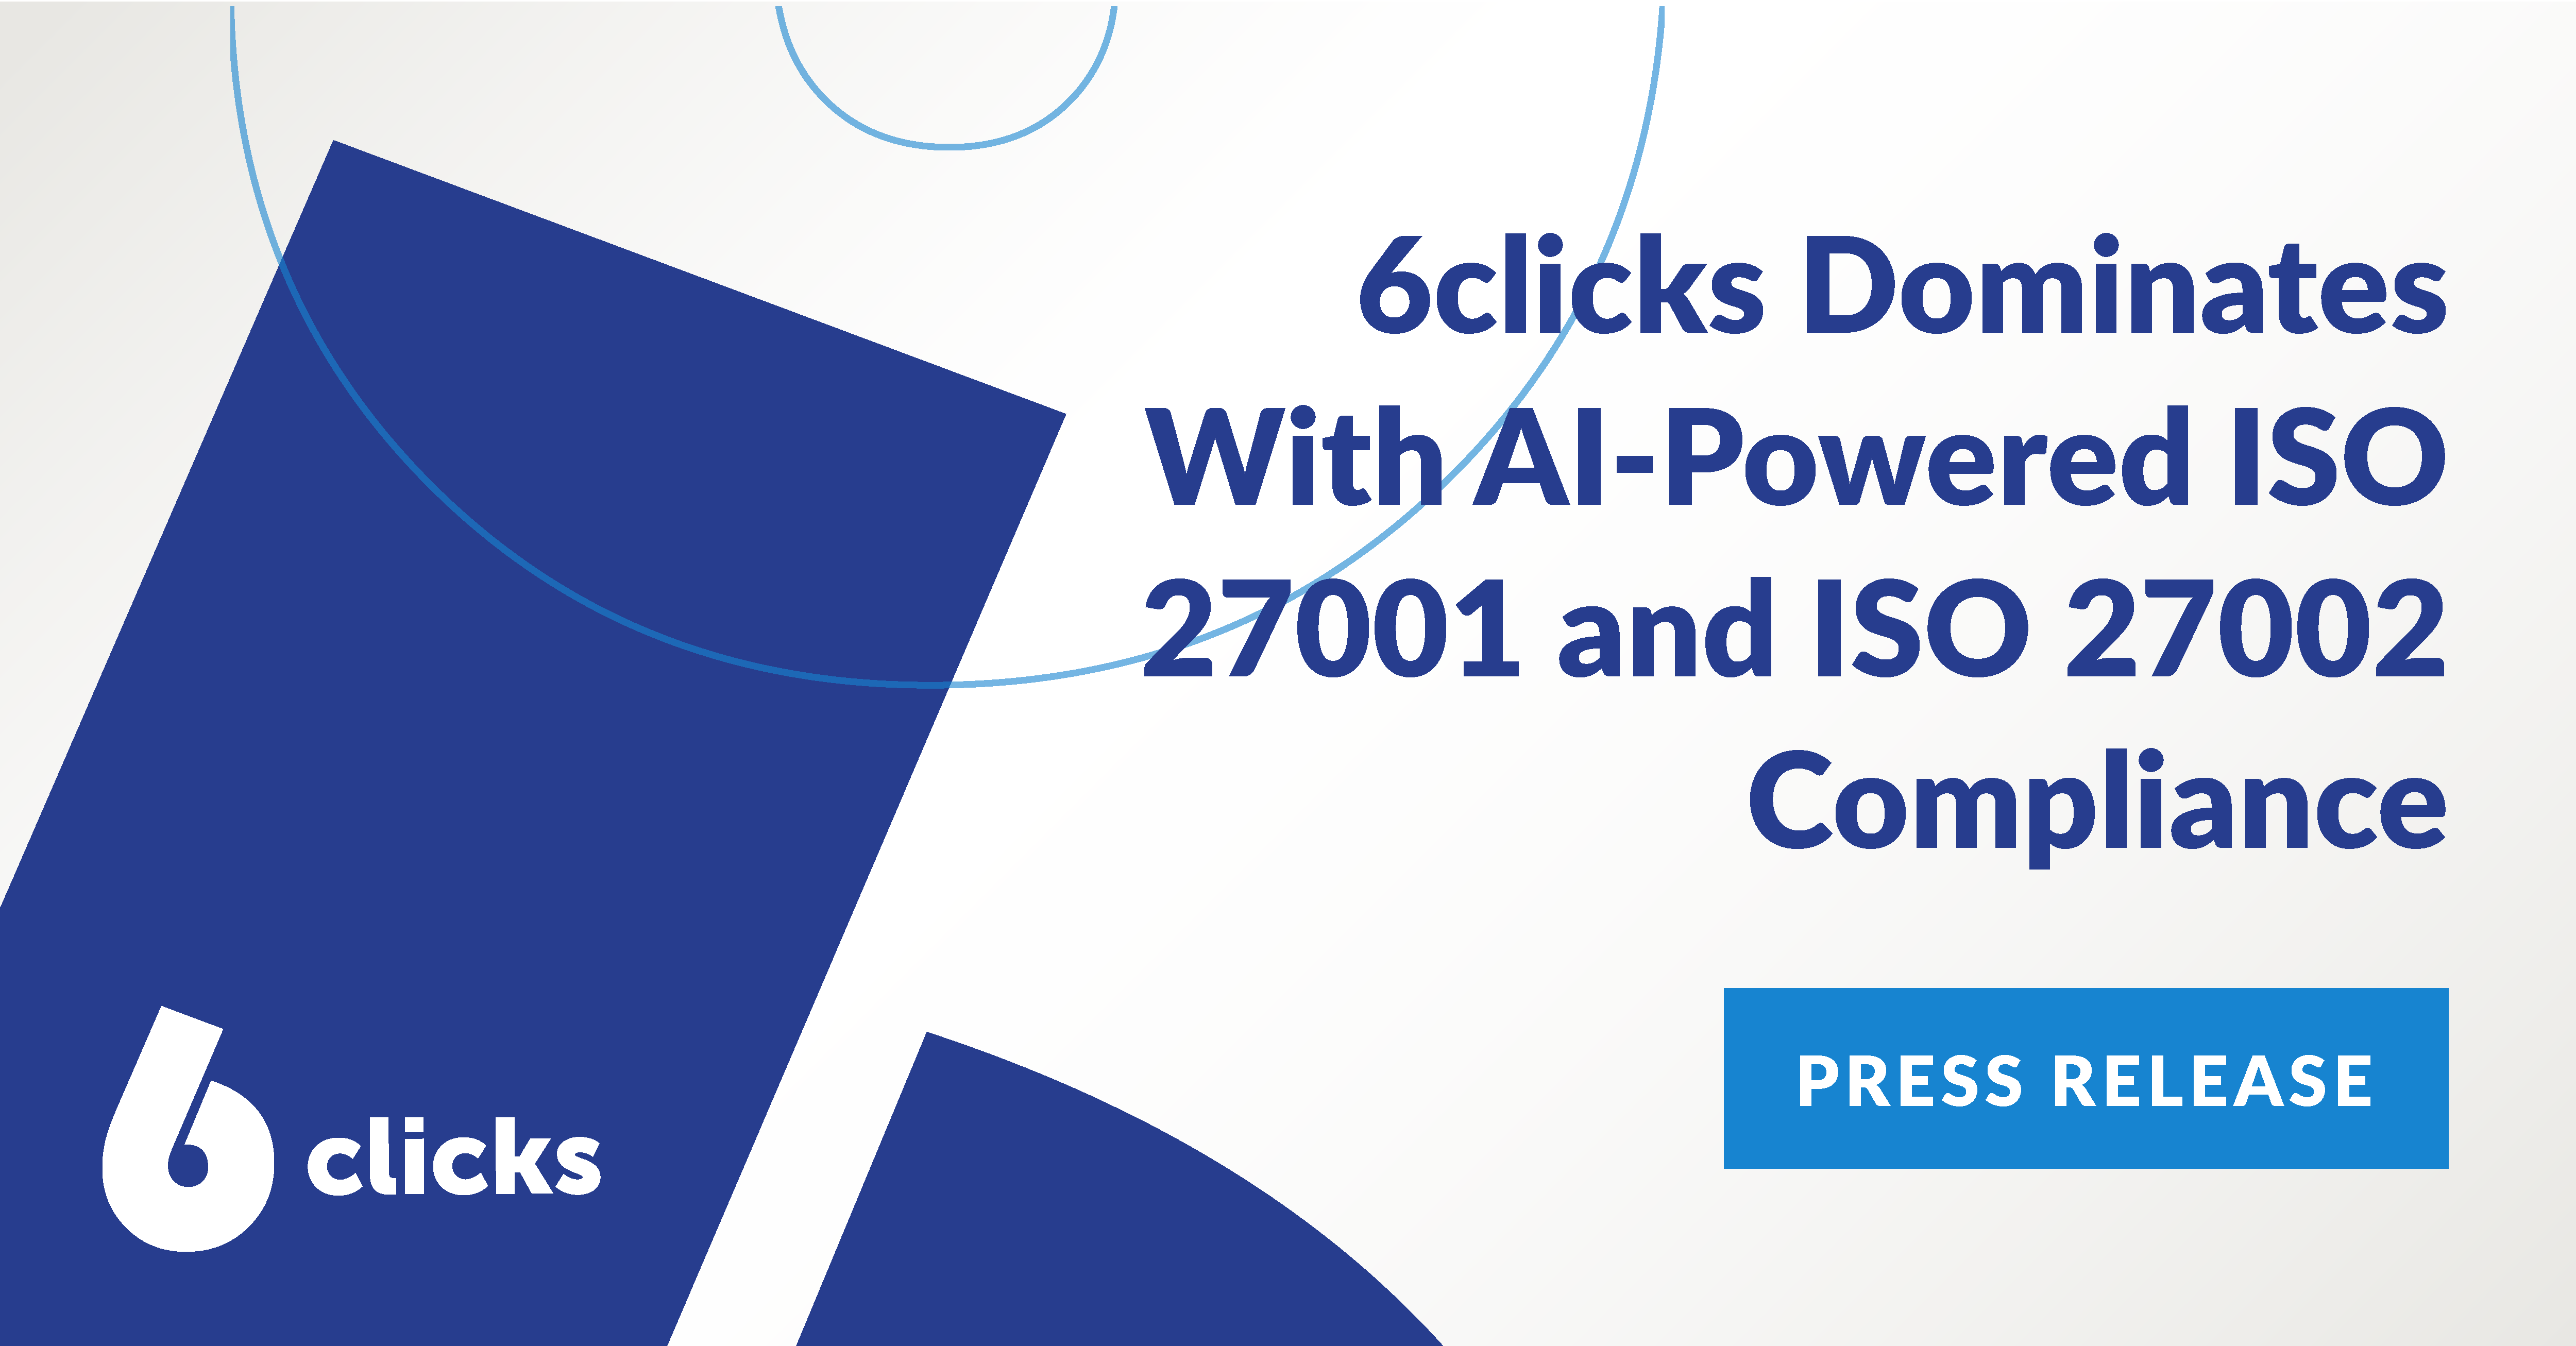 6clicks GRC Leader Dominates With AI-Powered Platform for ISO 27001 and ISO 27002 Compliance